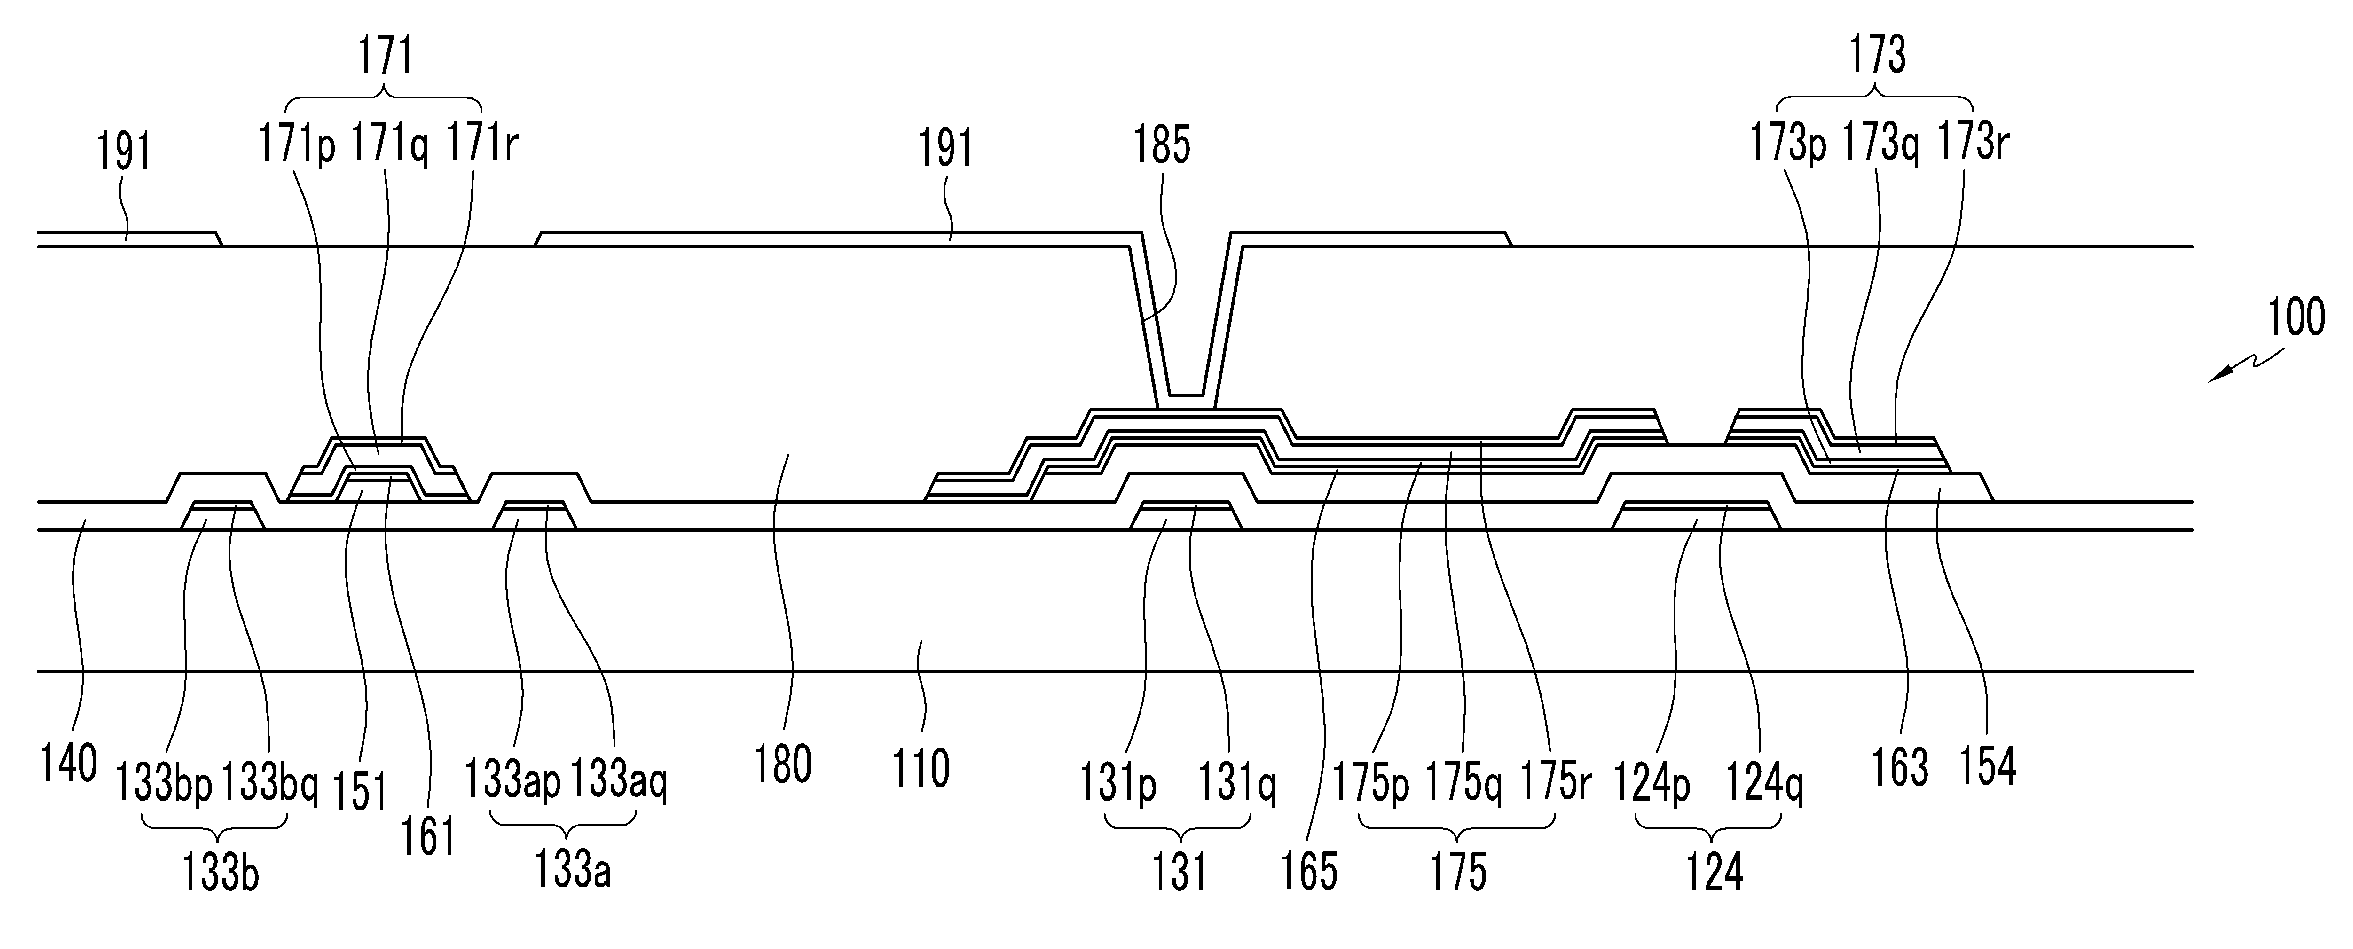 Thin film transistor panel and method of manufacturing the same